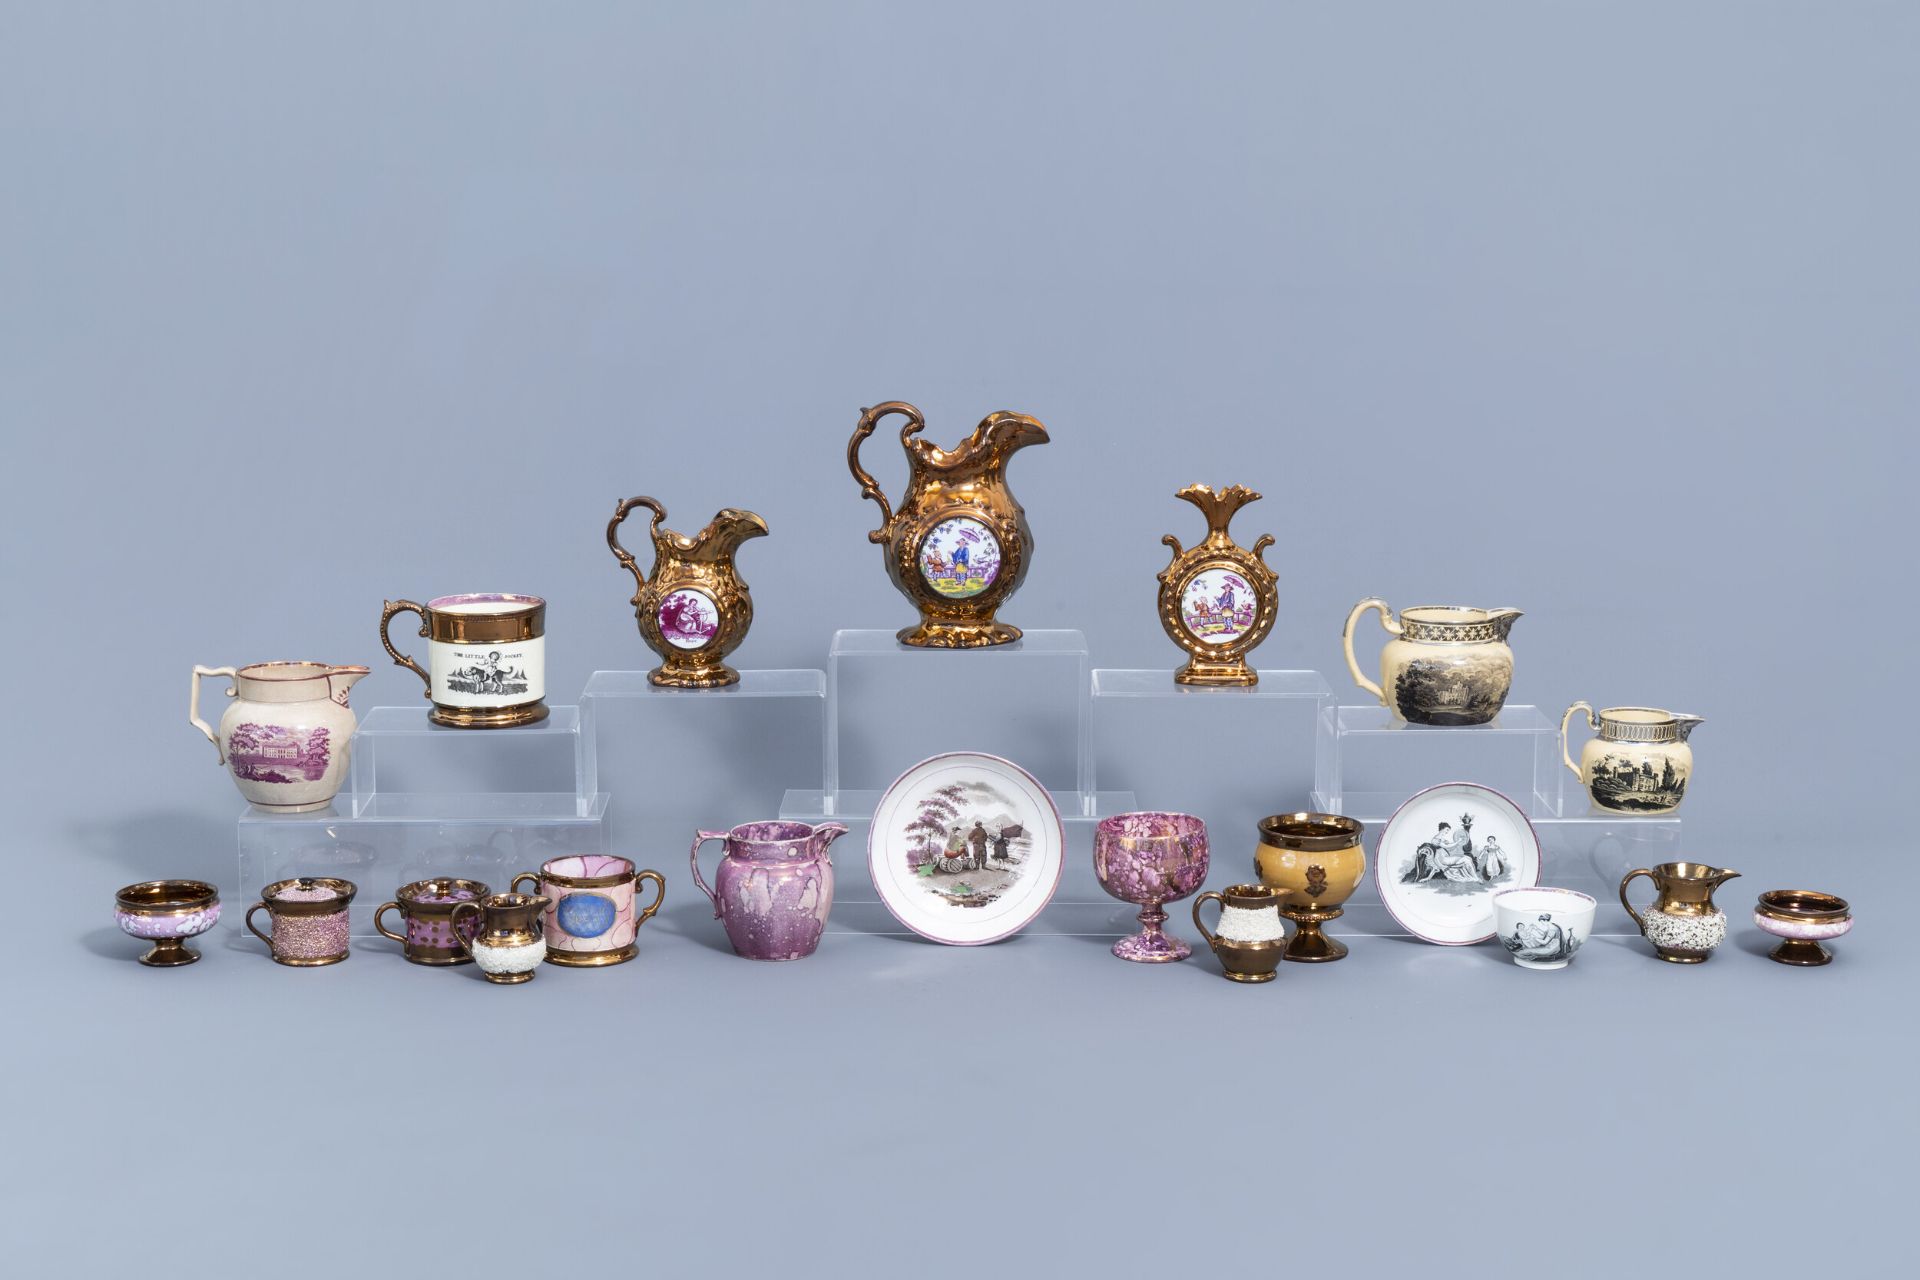 A varied collection of English lustreware items, 19th C. - Image 2 of 42